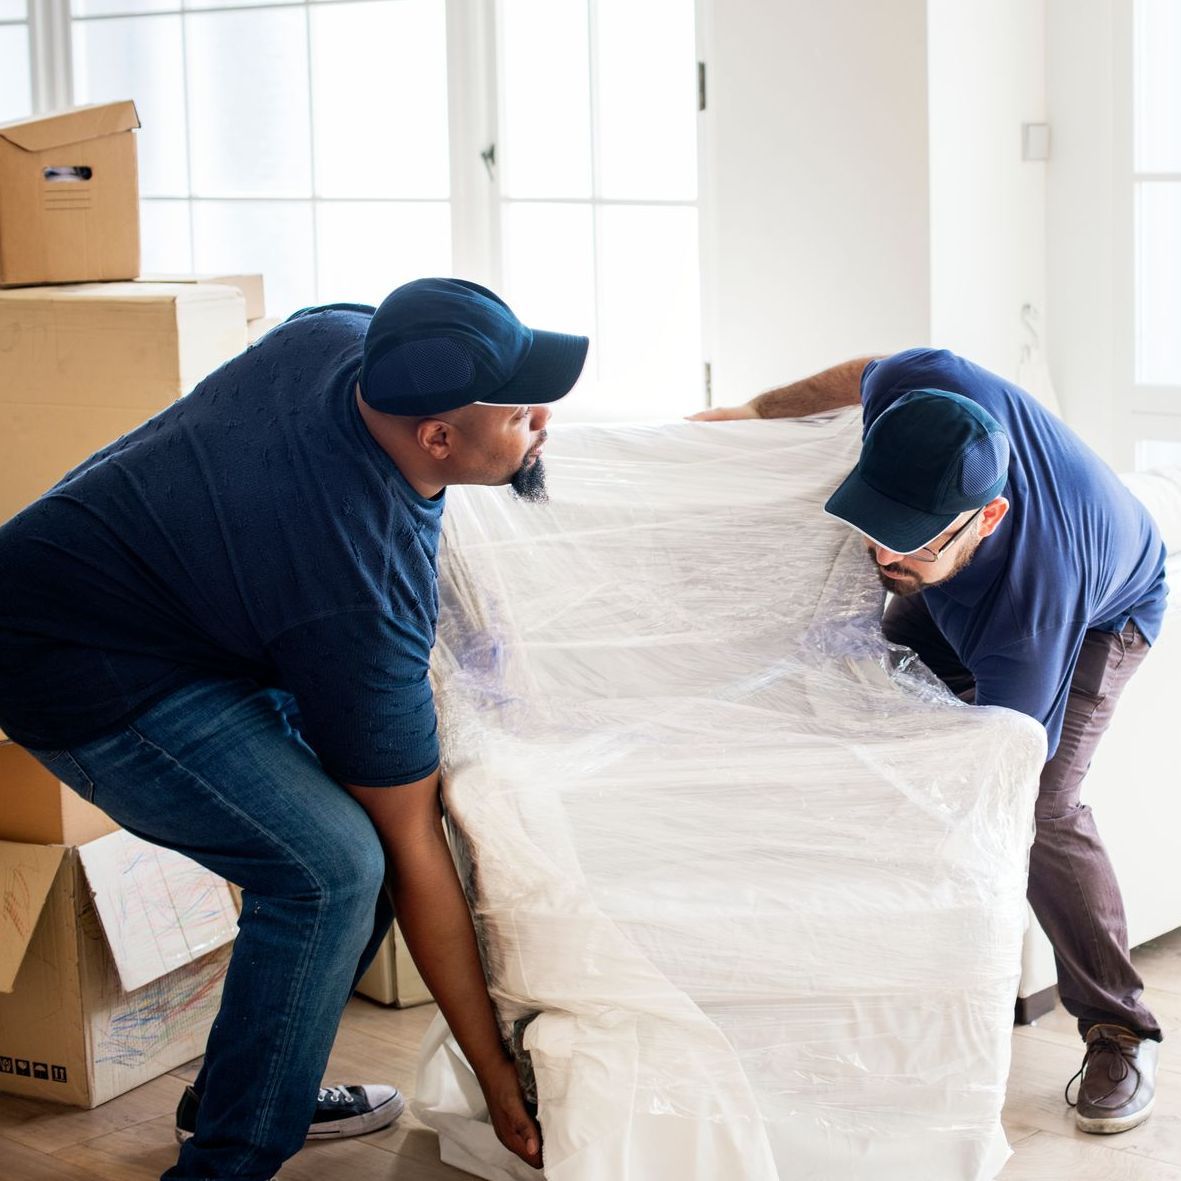 two men are wrapping a couch in plastic in a living room .